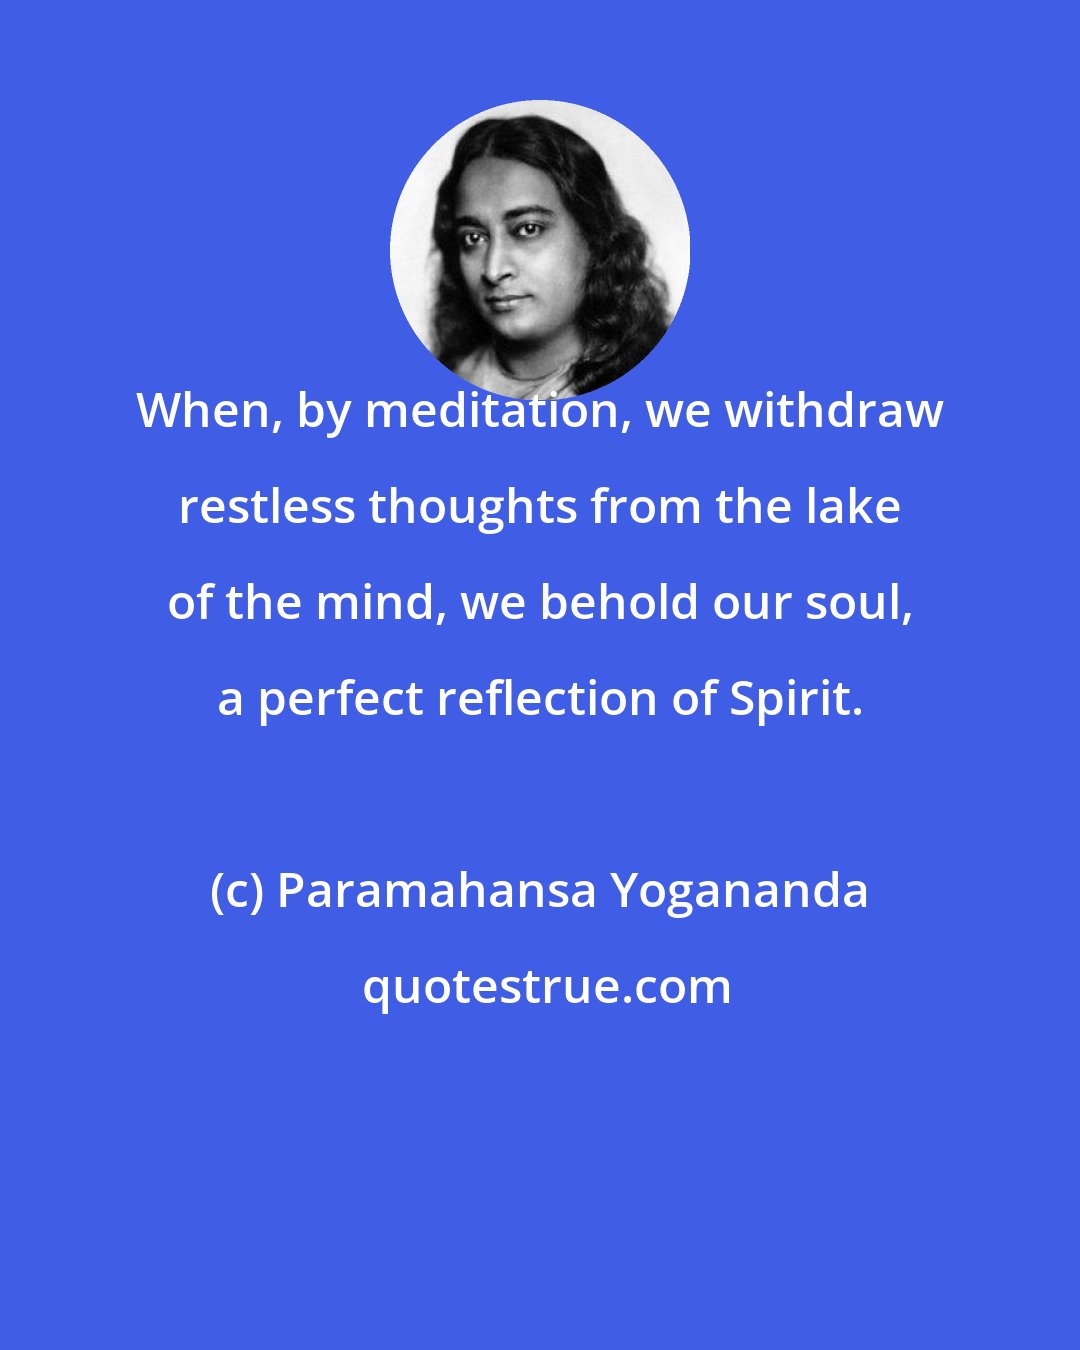 Paramahansa Yogananda: When, by meditation, we withdraw restless thoughts from the lake of the mind, we behold our soul, a perfect reflection of Spirit.